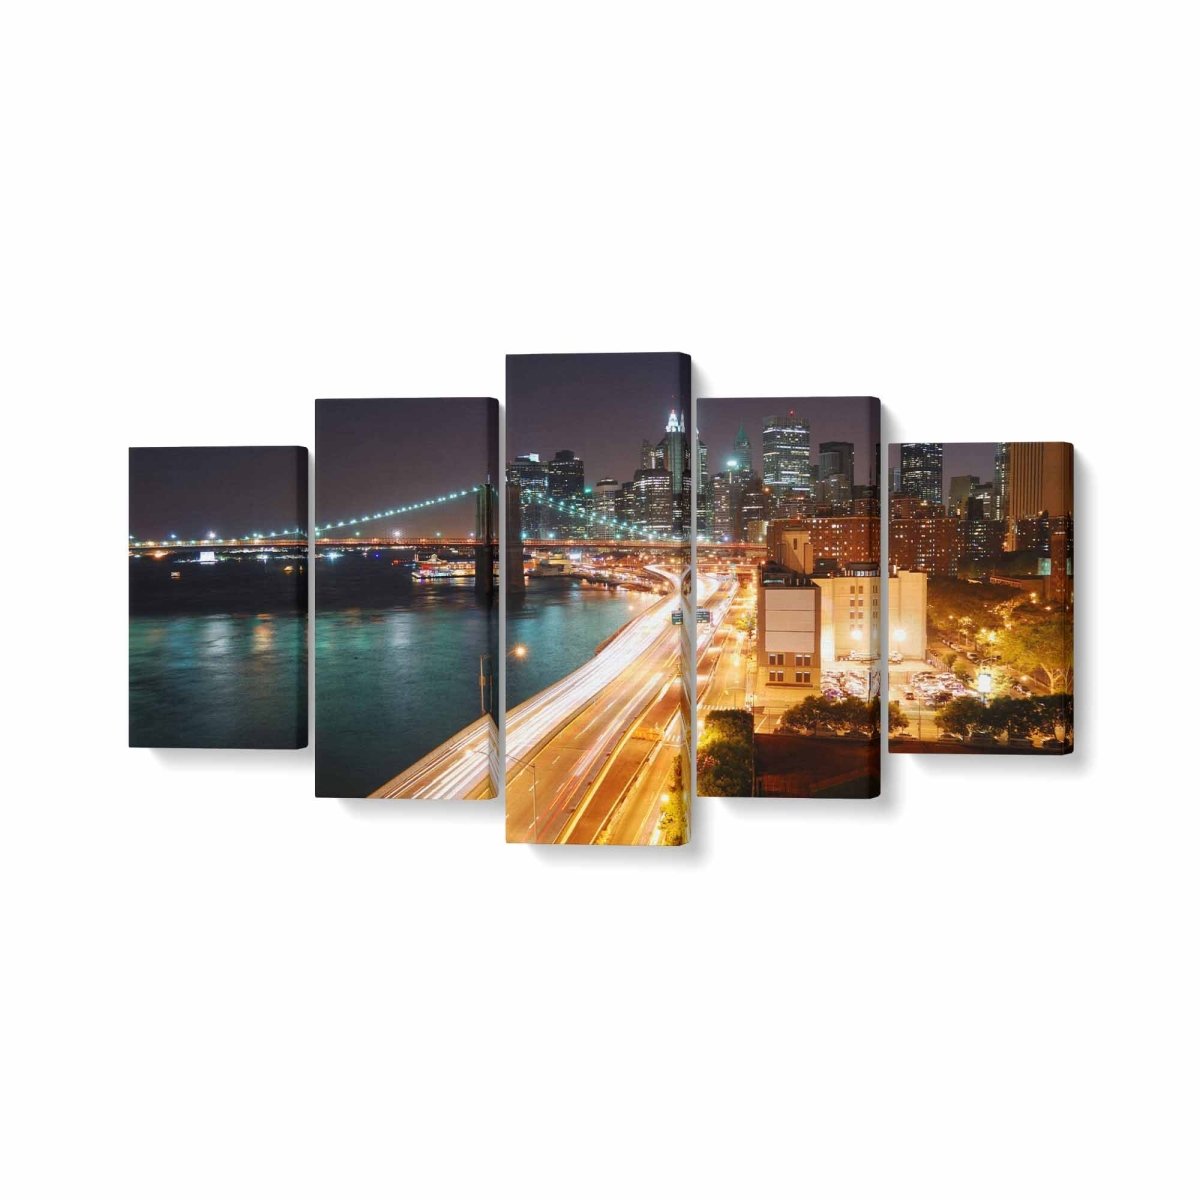 Tablou MultiCanvas 5 piese Night Light City - clevny.ro